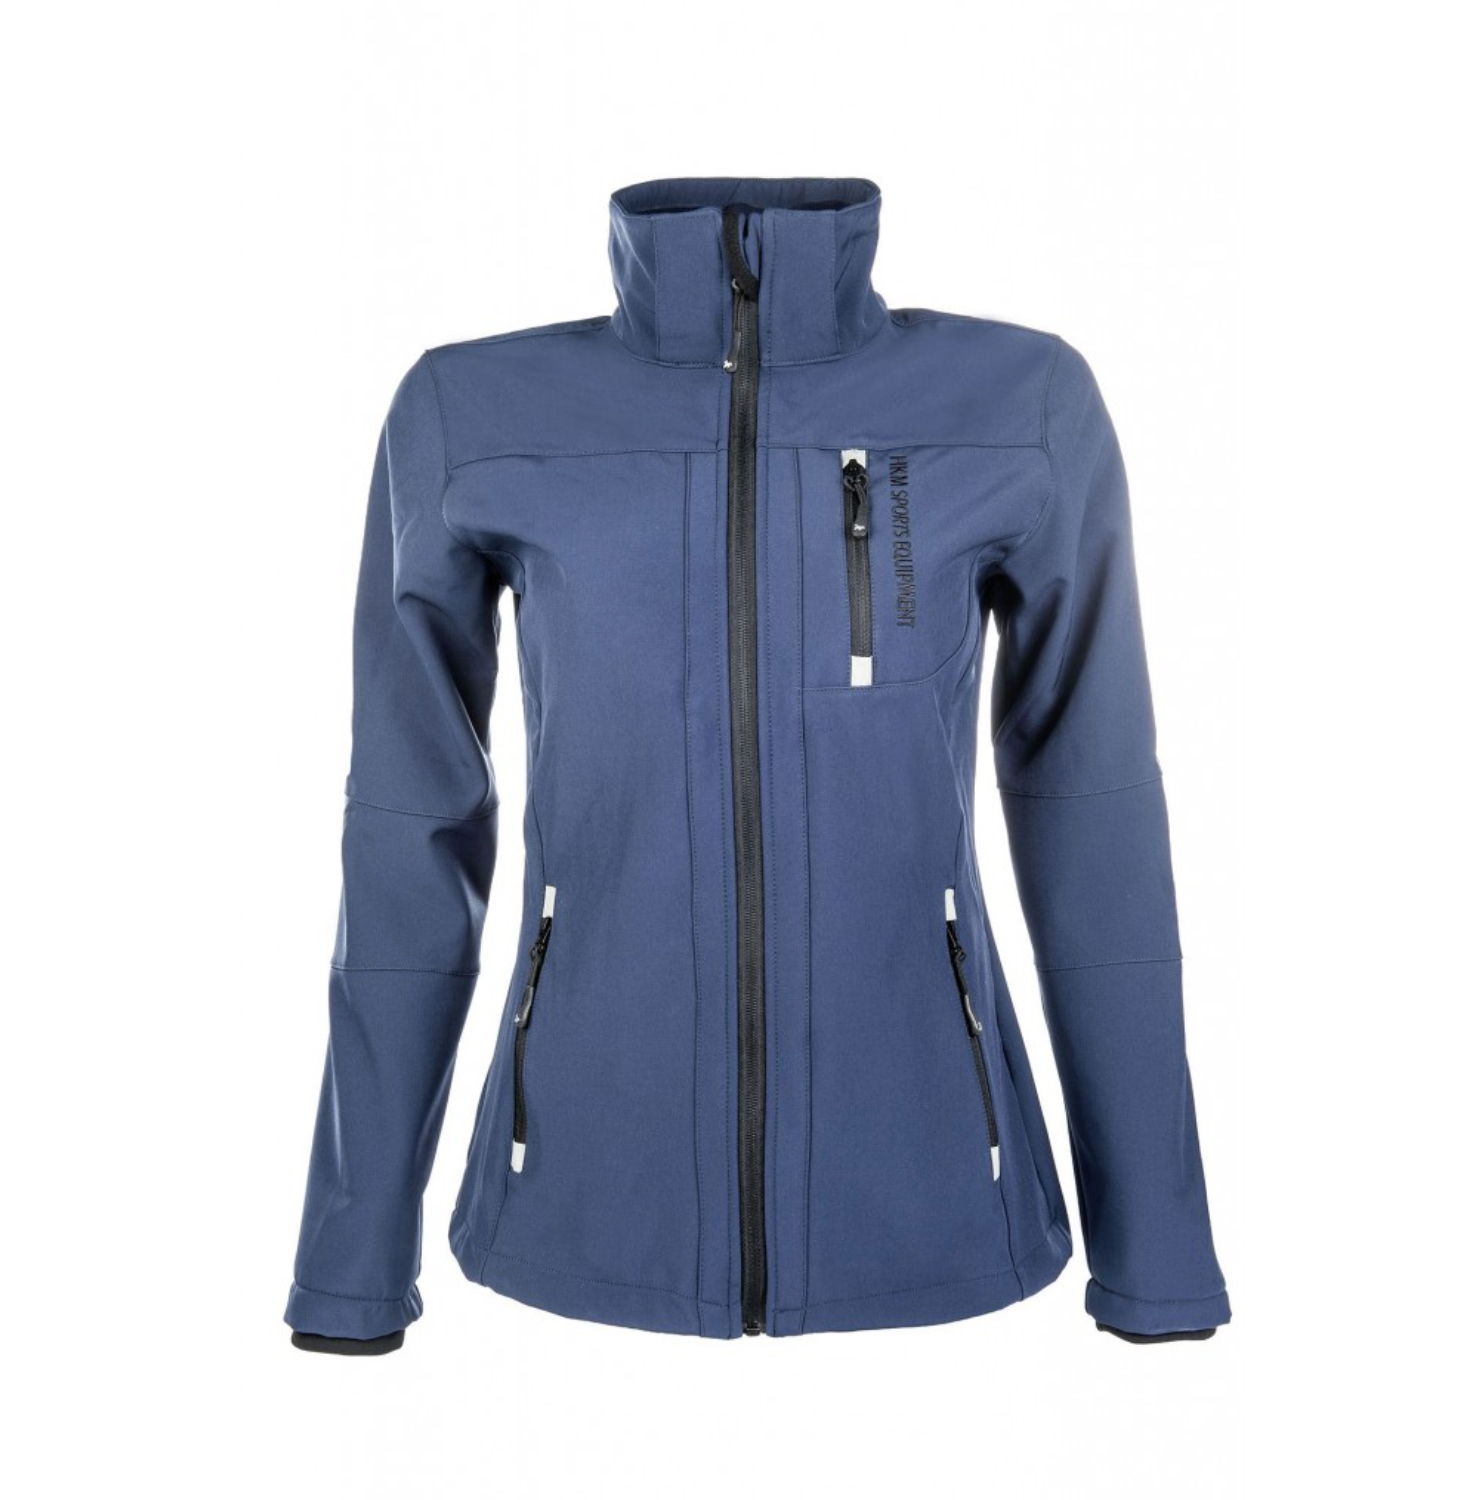 HKM Ladies Softshell Sport Jacket - Equestrian Fashion Outfitters